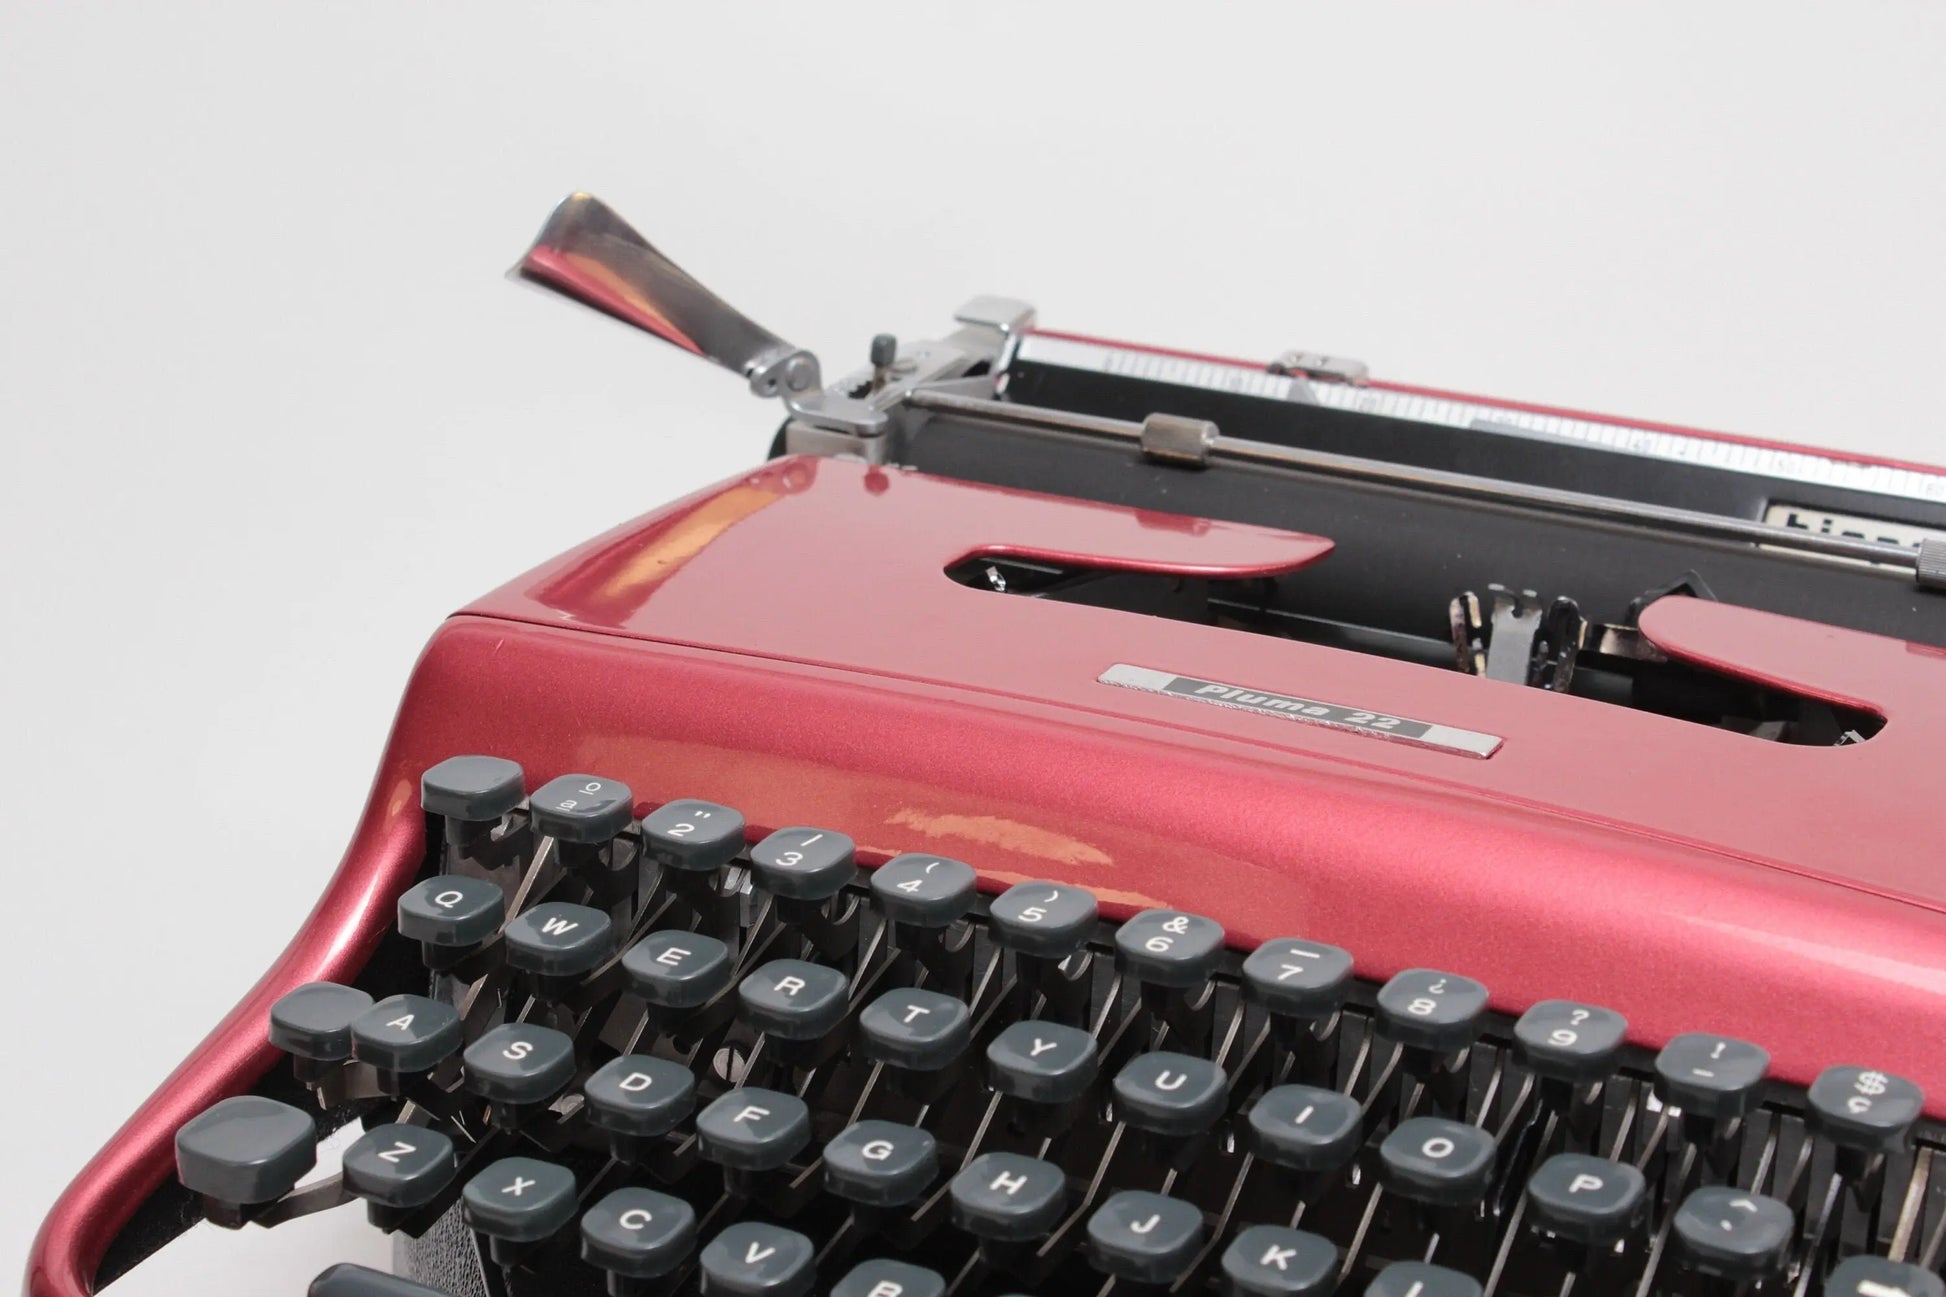 Limited Edition Olivetti Pluma 22 Coral Red Typewriter, Vintage, Manual Portable, Professionally Serviced by Typewriter.Company - ElGranero Typewriter.Company